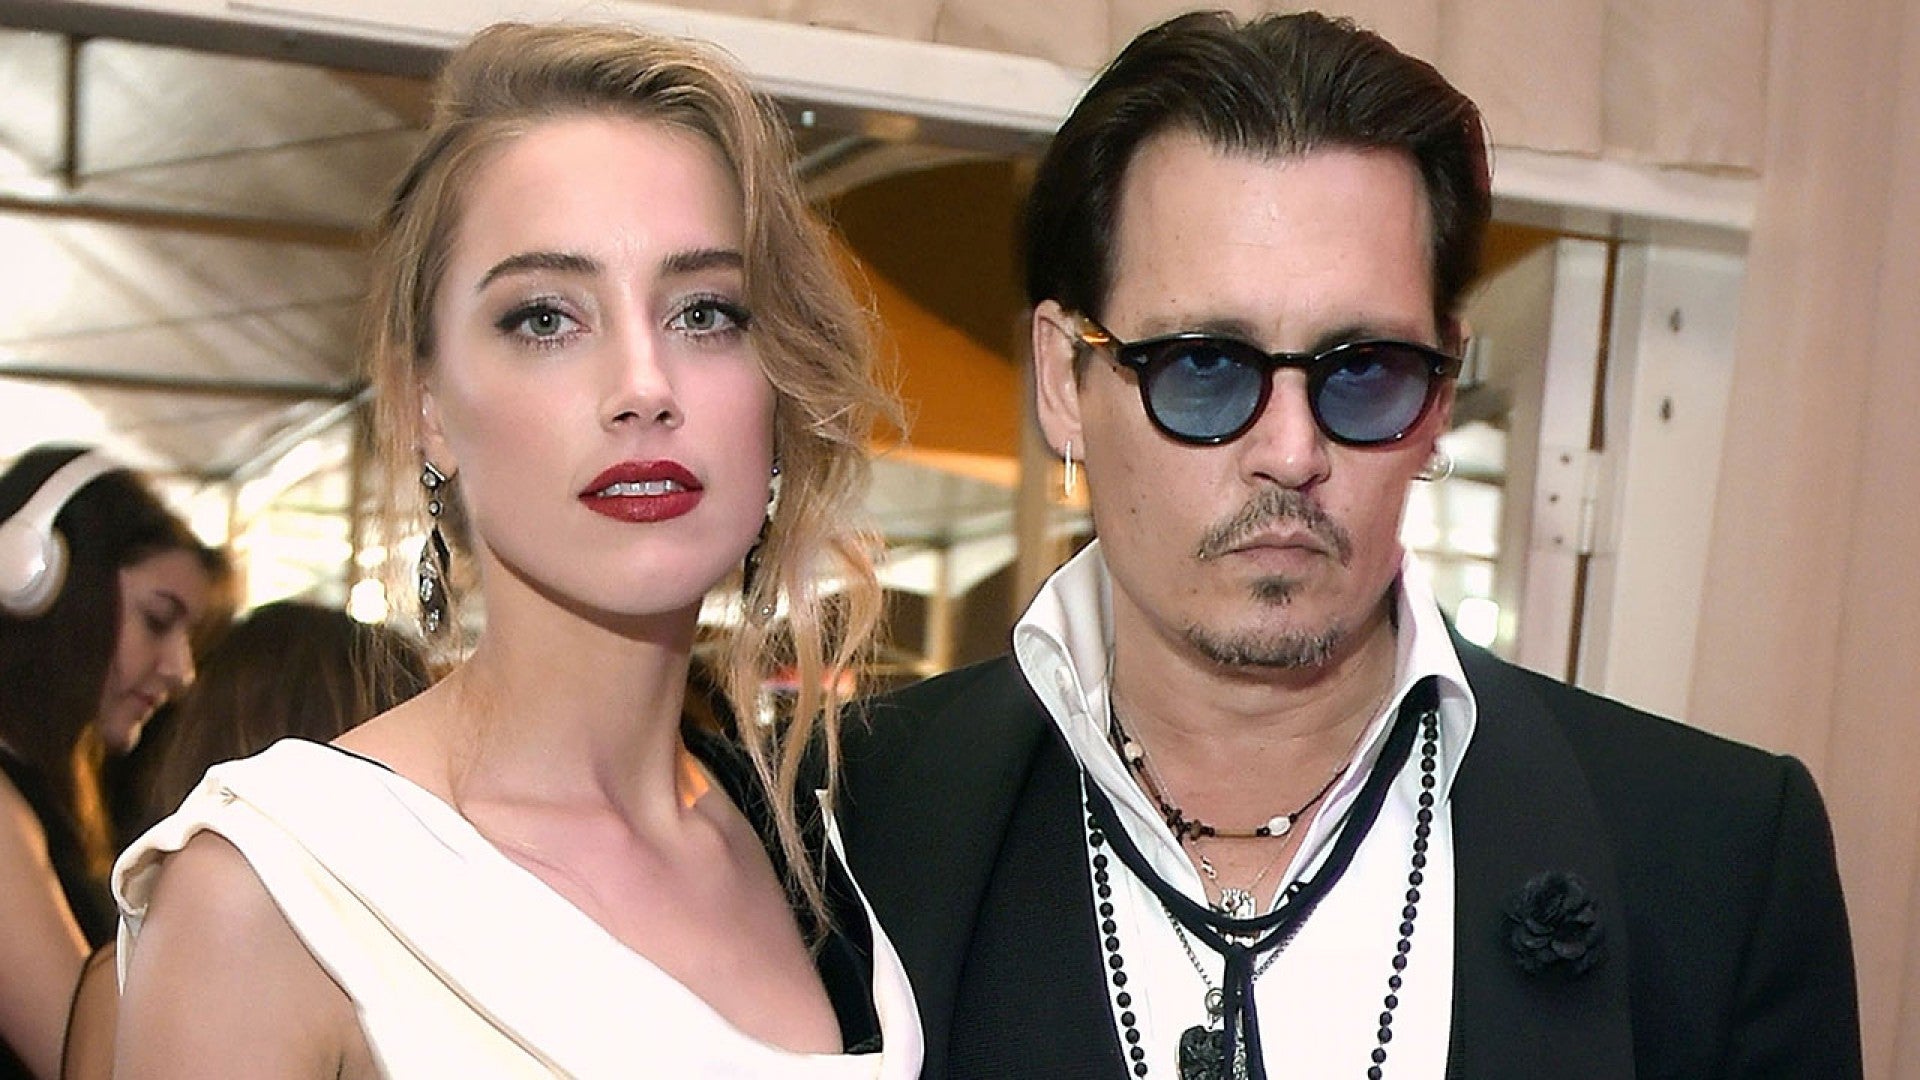 EXCLUSIVE: Amber Heard's Texts Detail Alleged Assault By Johnny Depp ...